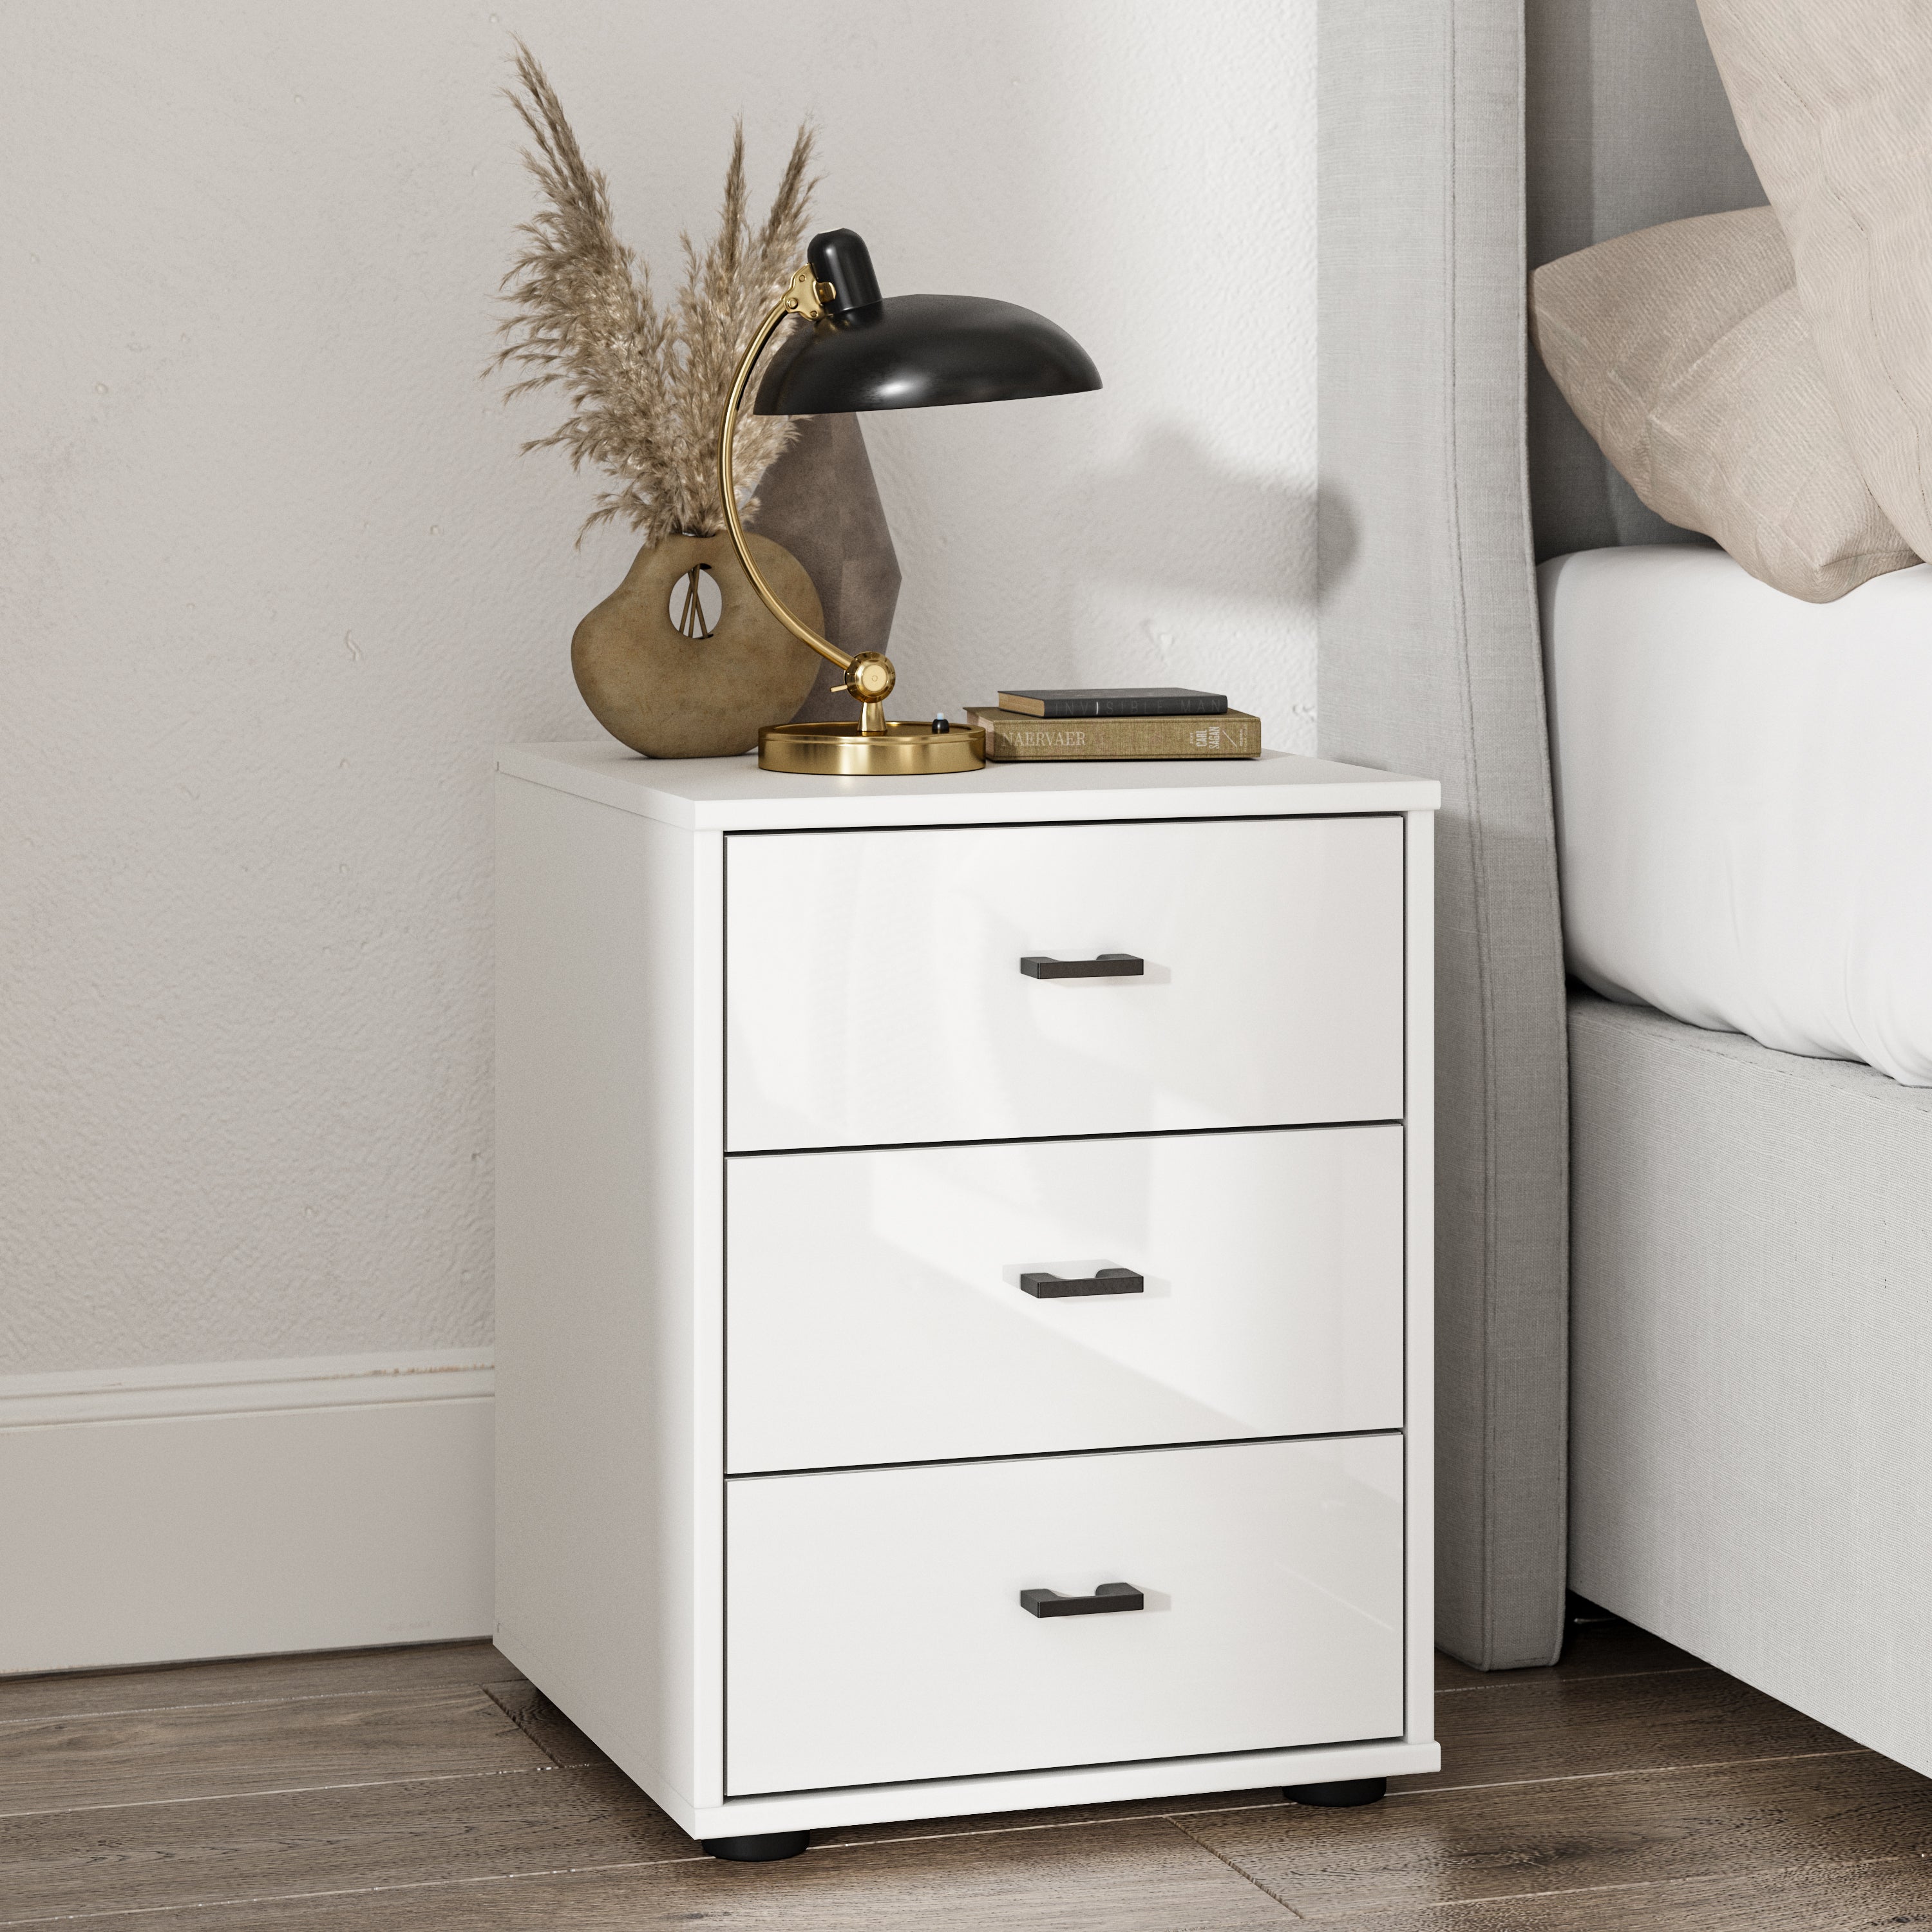 Wiemann Kahla Glass Fronted 3 Drawer Bedside Table White